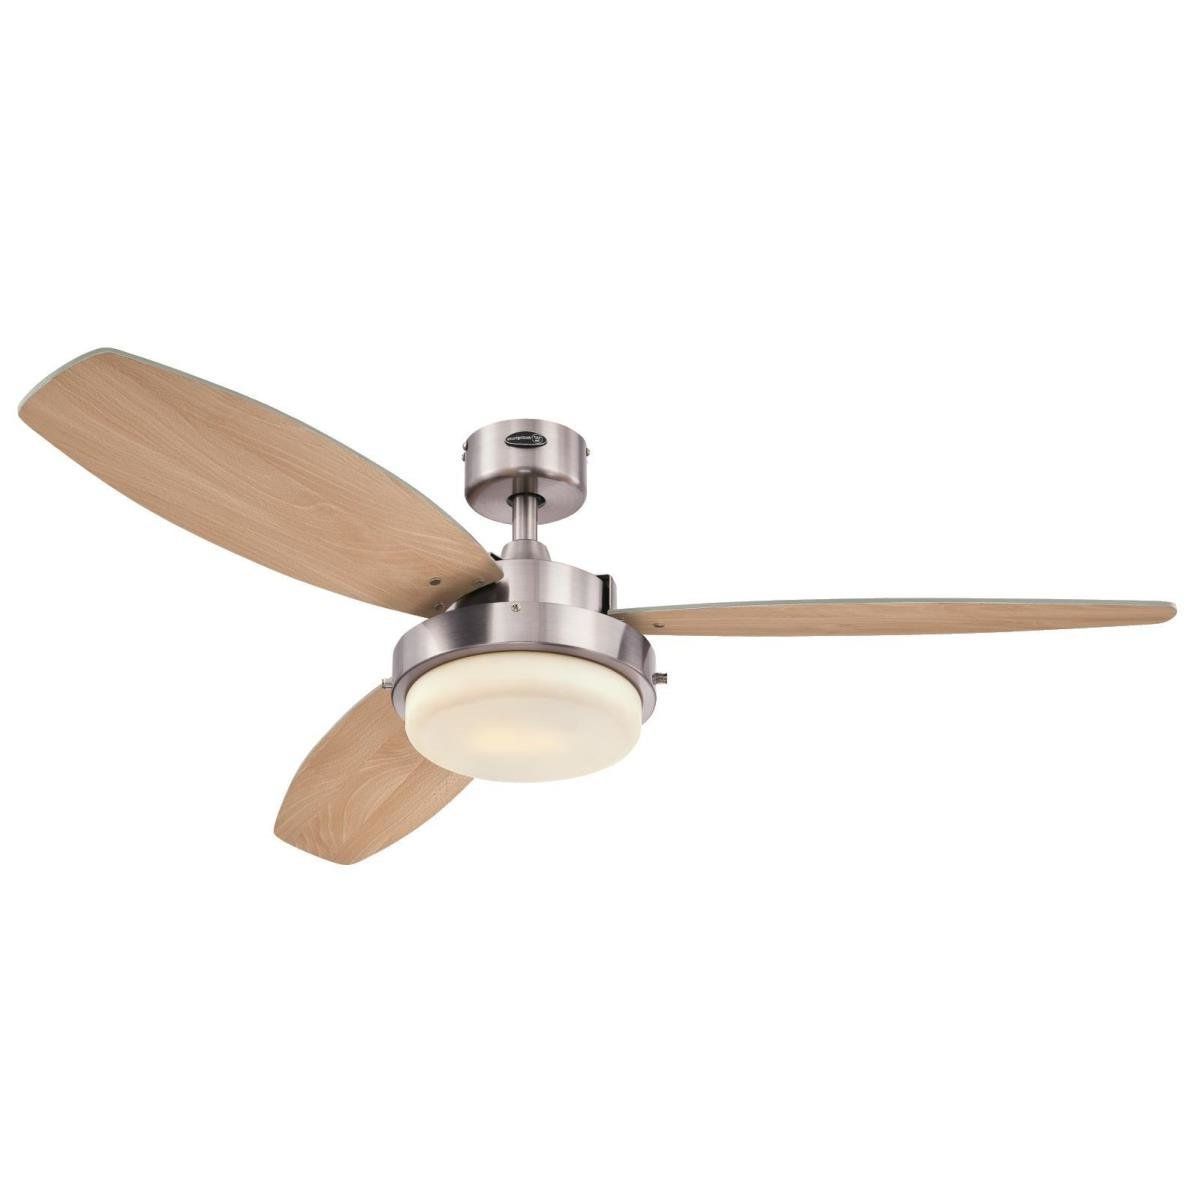 Corsa 3 Blade Ceiling Fans Throughout Fashionable 52" Corsa 3 Blade Ceiling Fan With Remote, Light Kit (View 5 of 20)